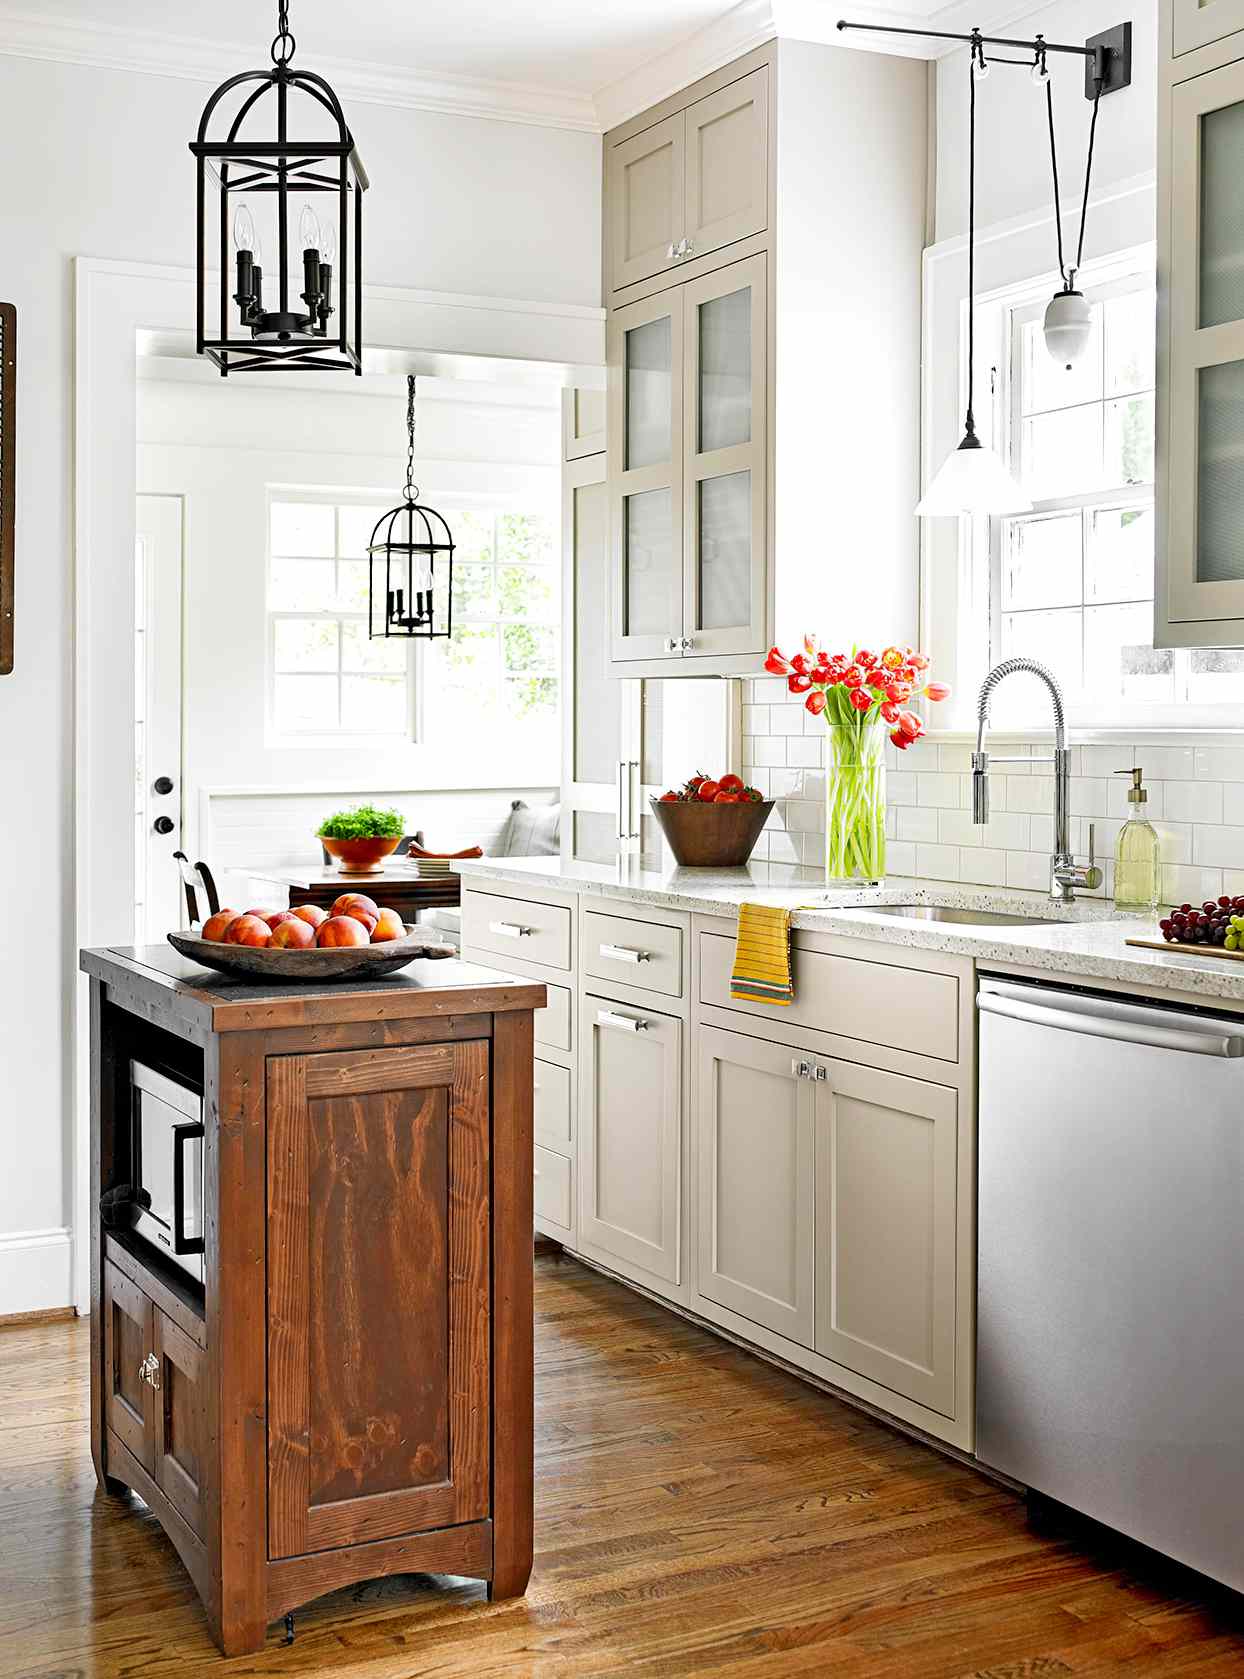 25 Small Kitchen Color Ideas for a Big Boost of Style   Better ...